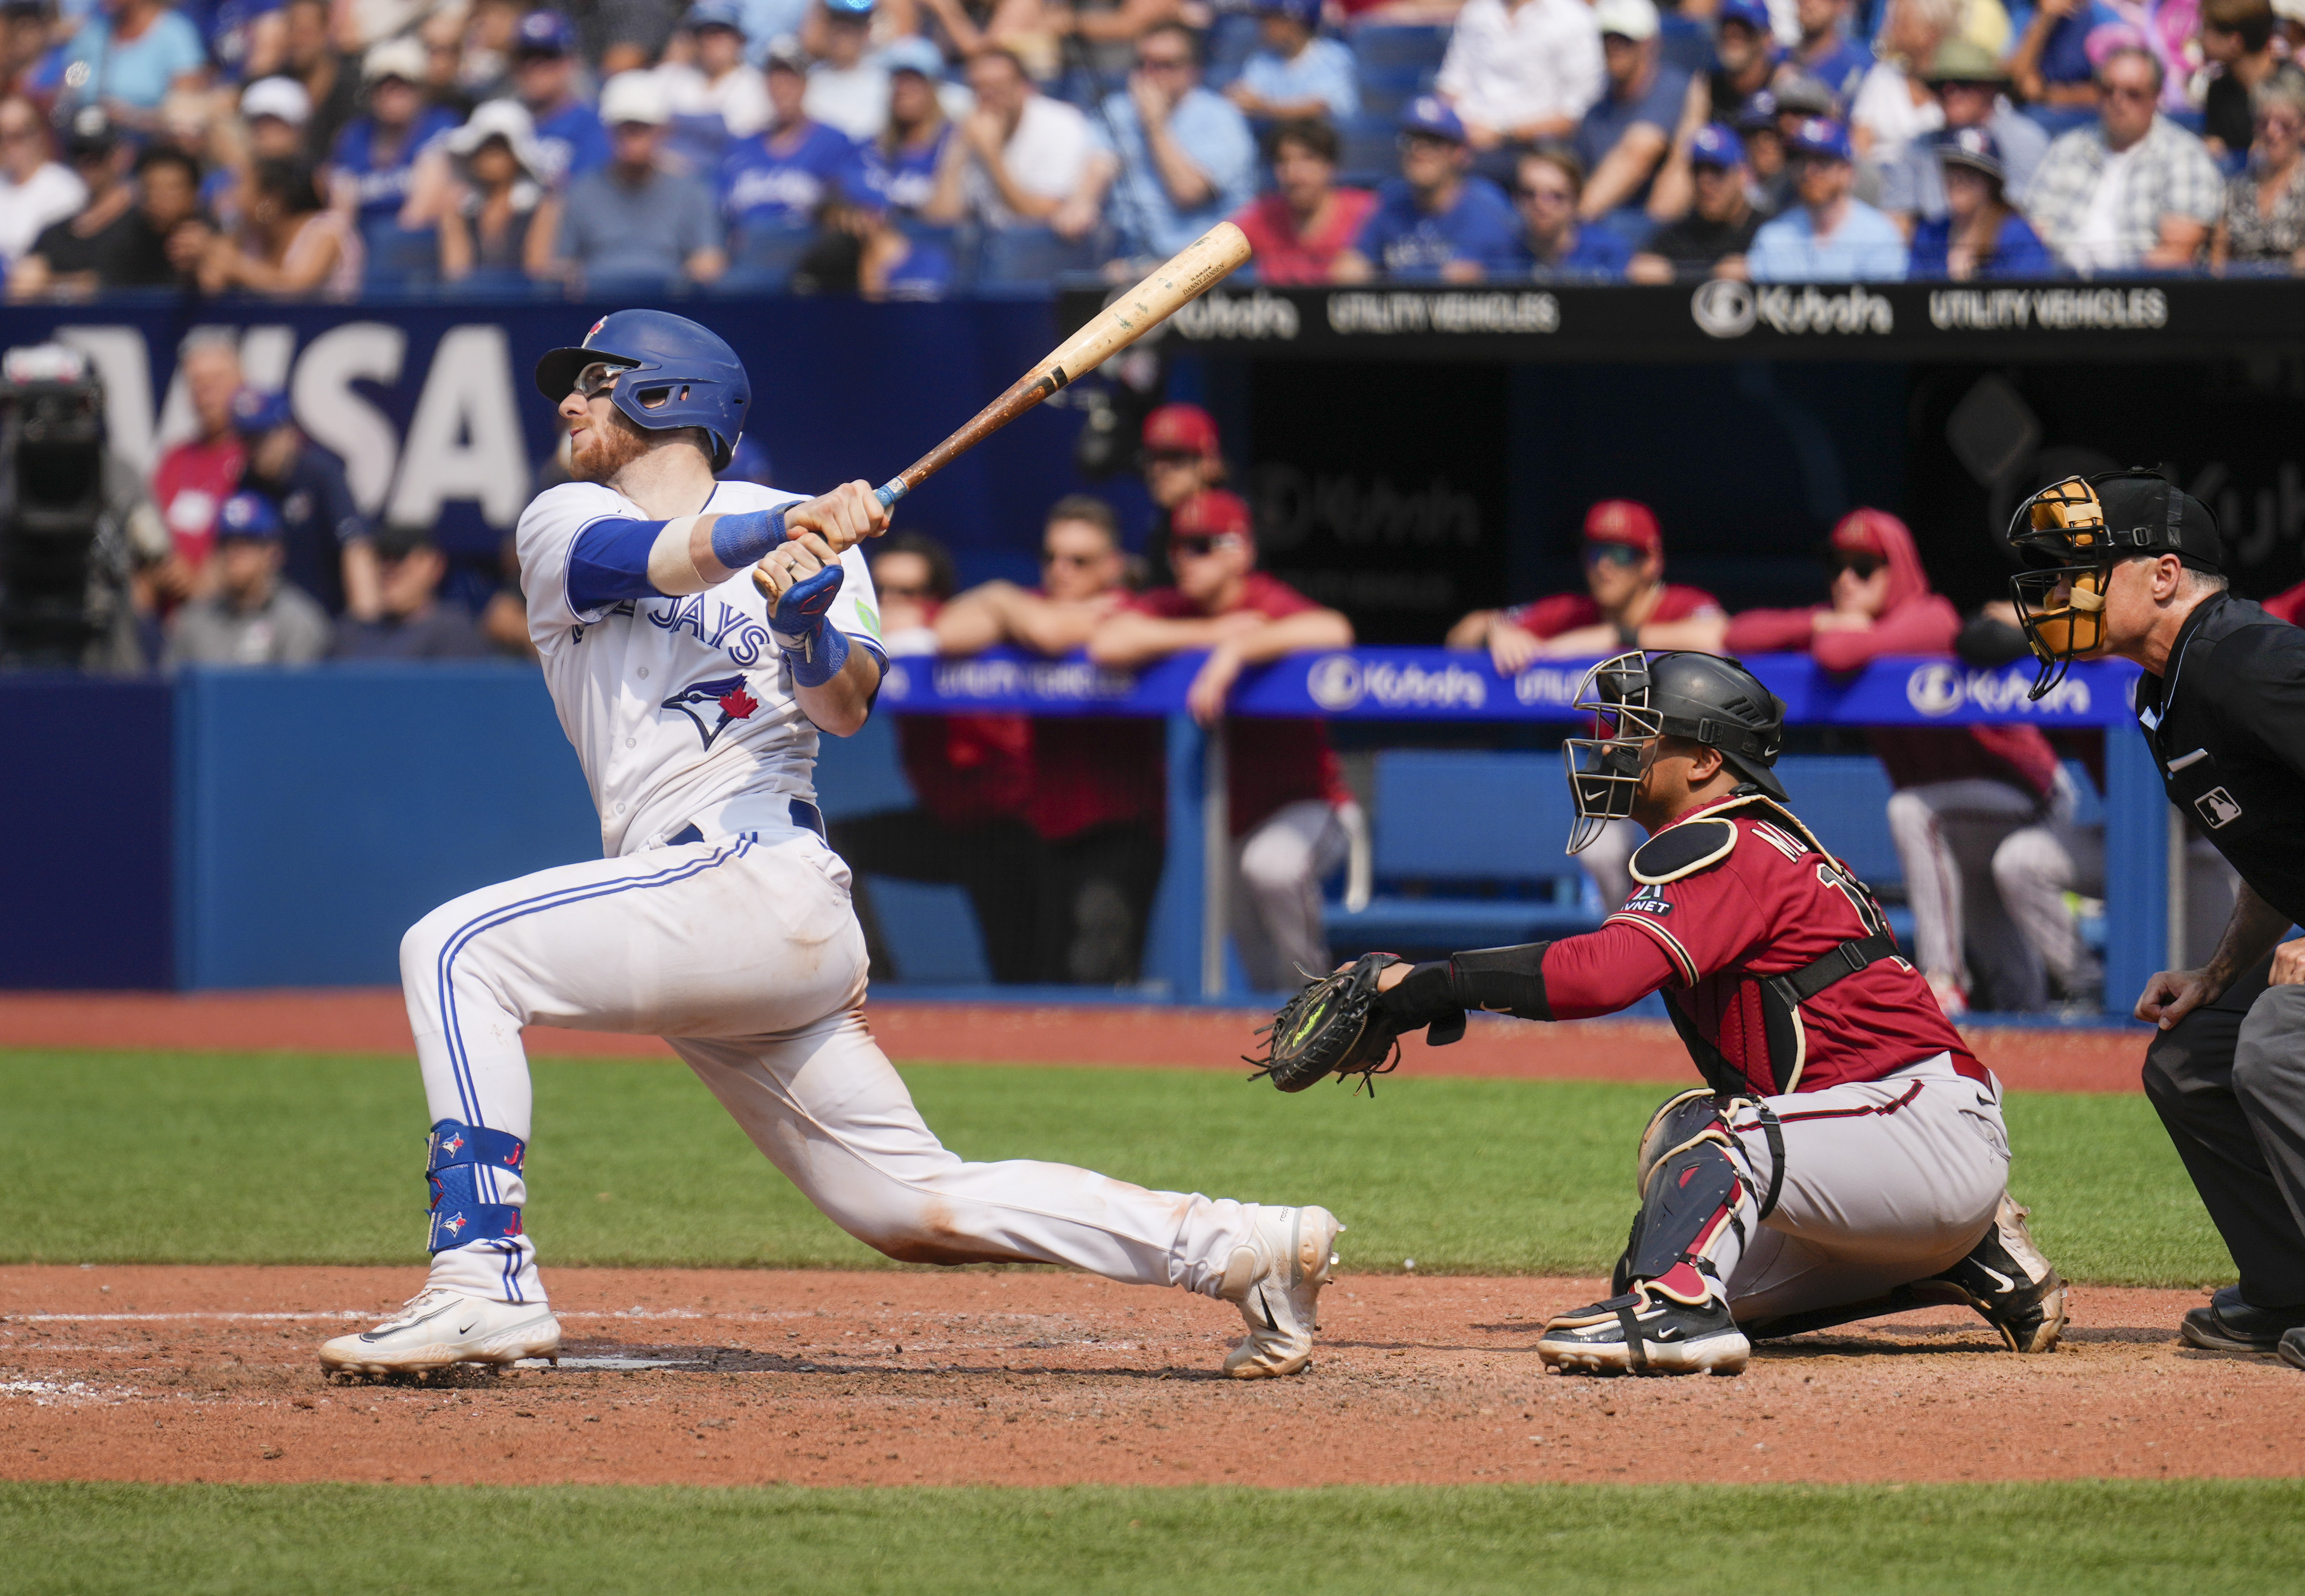 CAN DANNY JANSEN PROVIDE FOR THE TORONTO BLUE JAYS 